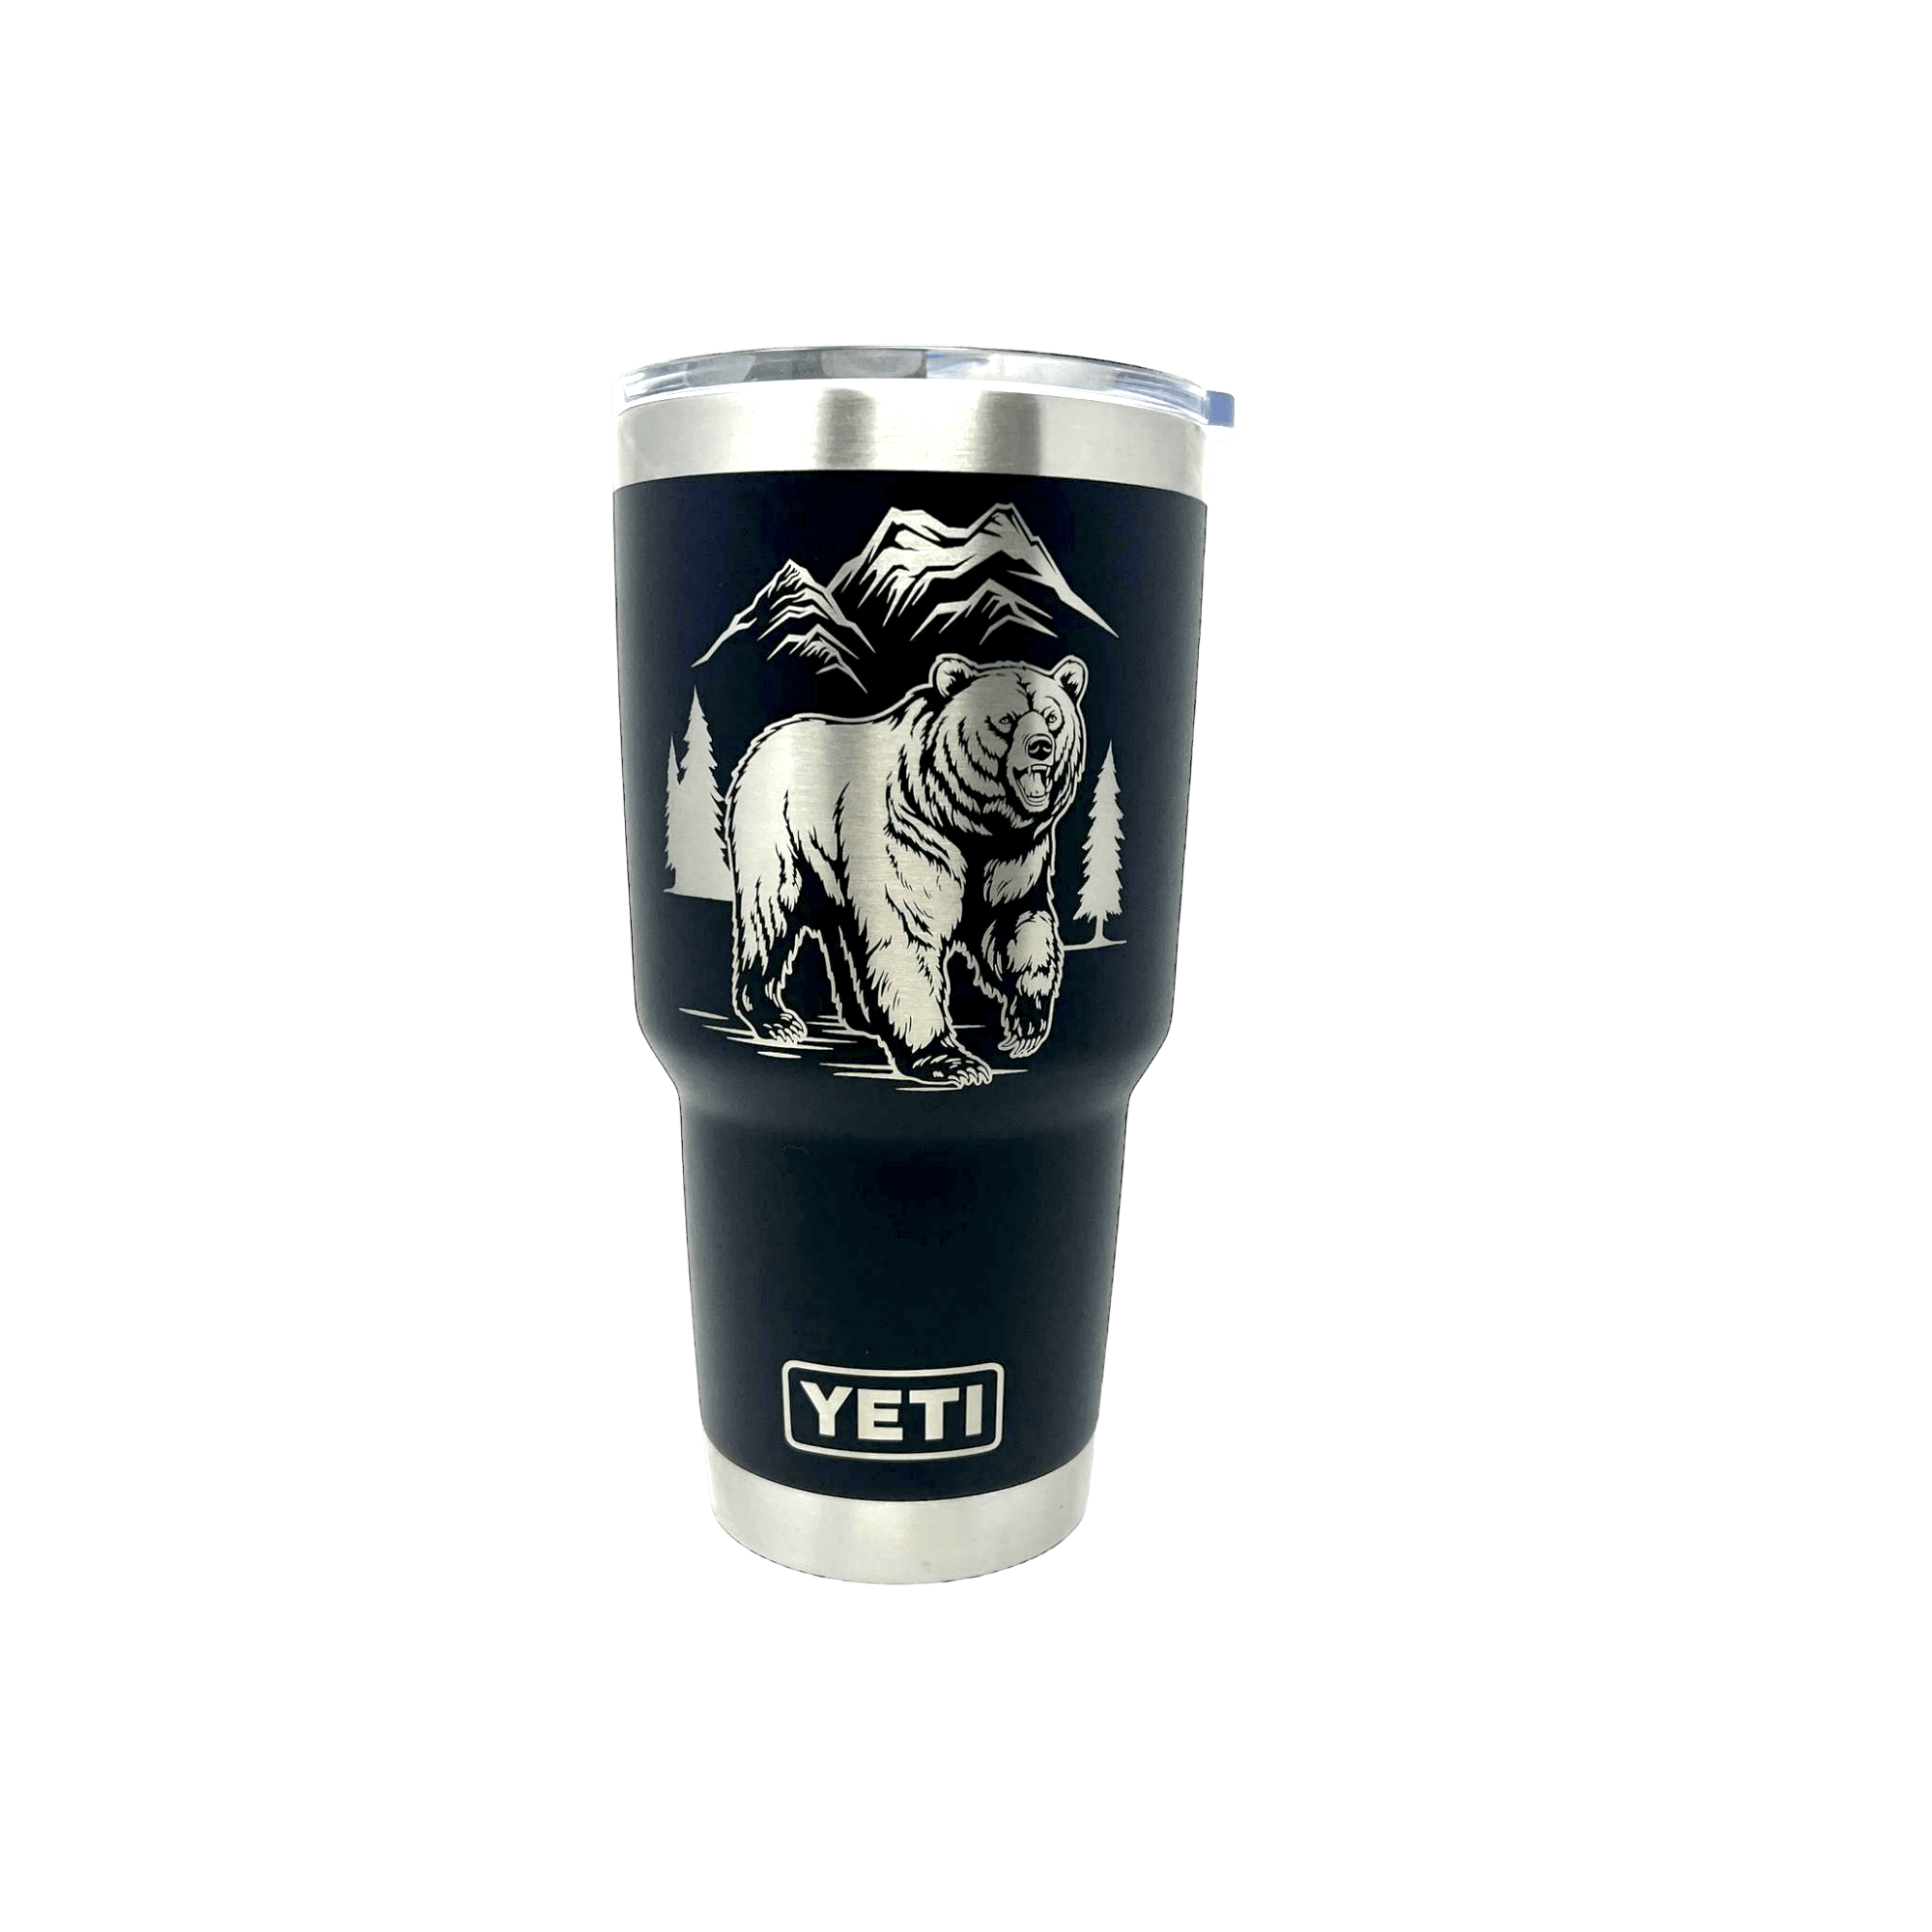 YETI Products For Everyday Adventures